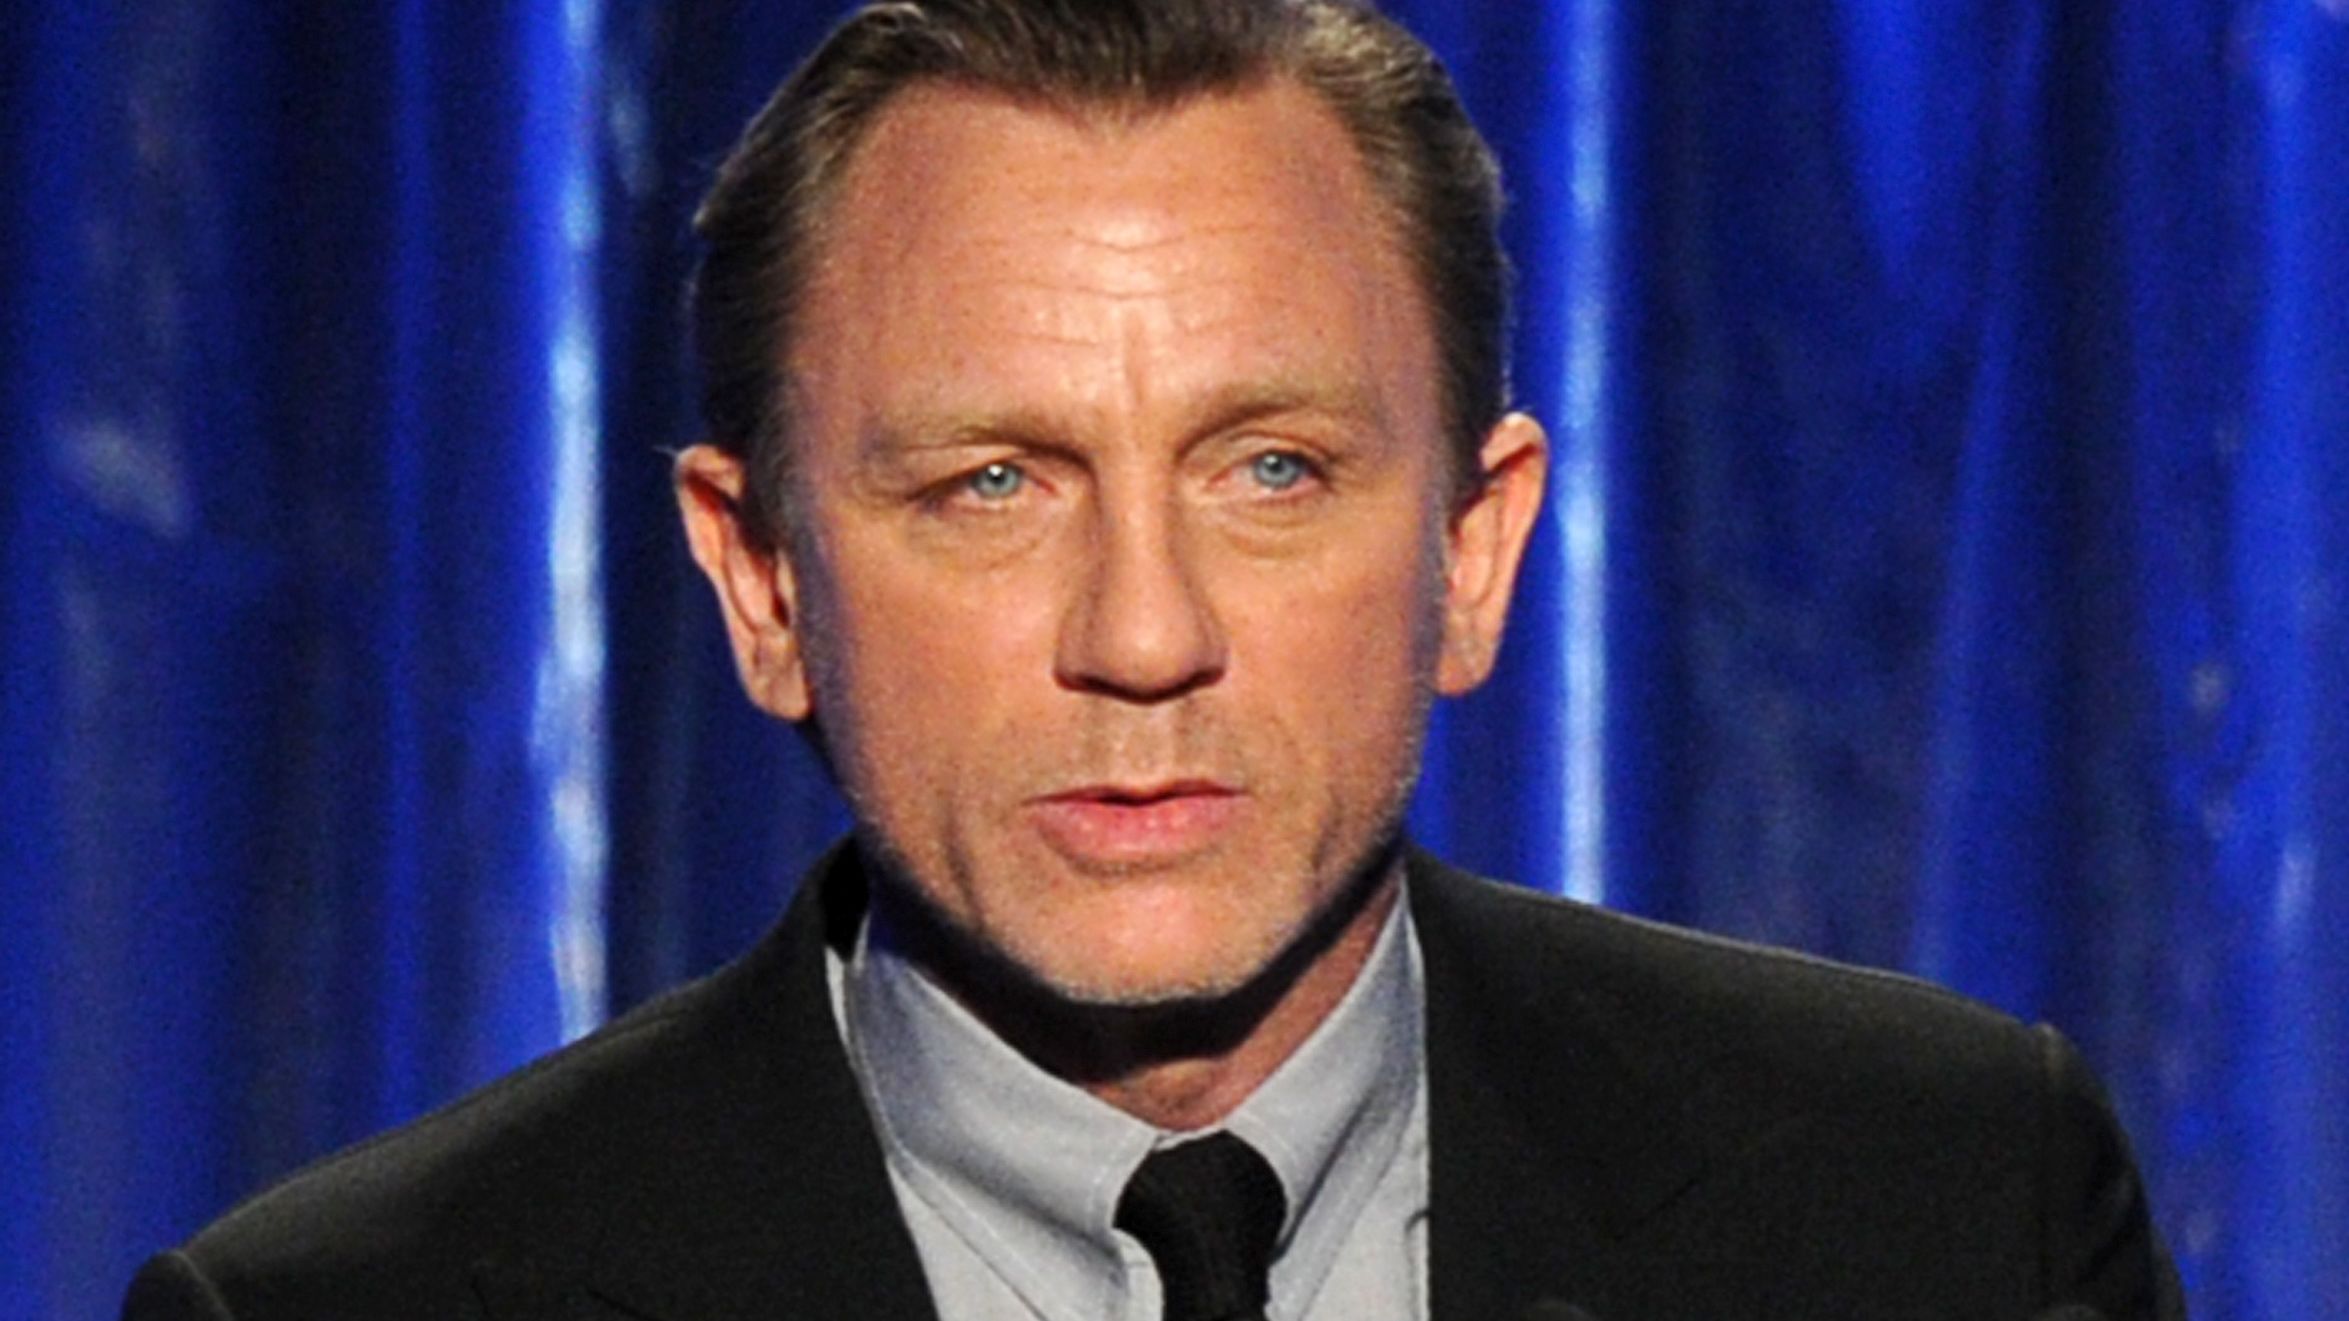 Actor Daniel Craig at the 25th annual Producers Guild of America Awards on January 19, 2014 in Beverly Hills, California.